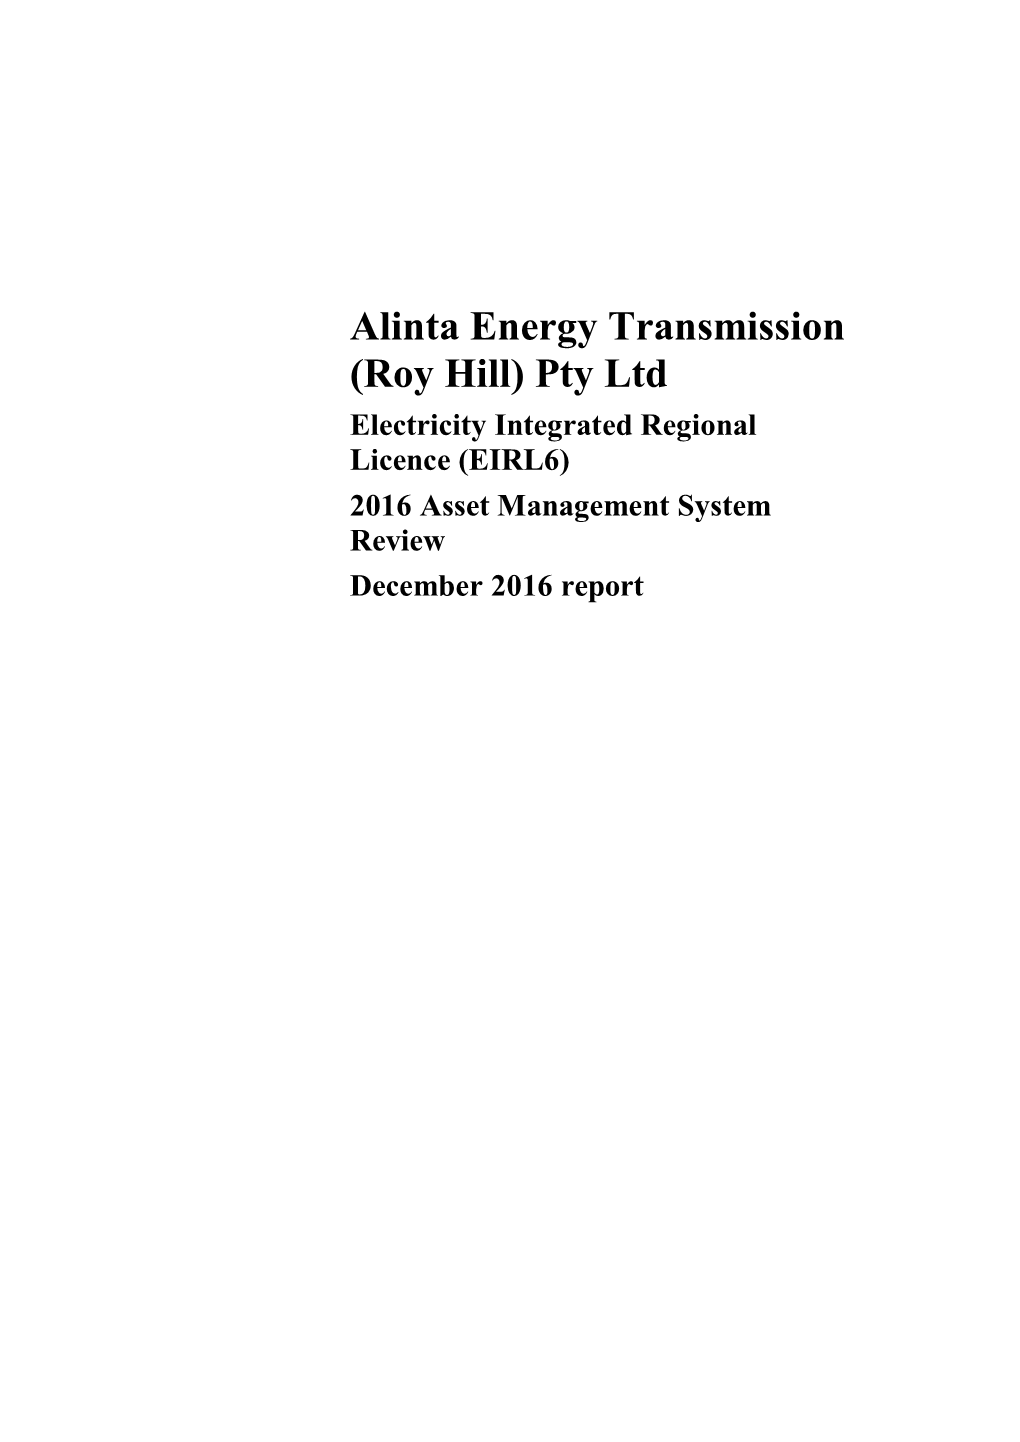 Alinta Energy Transmission (Roy Hill) Pty Ltd Electricity Integrated Regional Licence (EIRL6) 2016 Asset Management System Review December 2016 Report